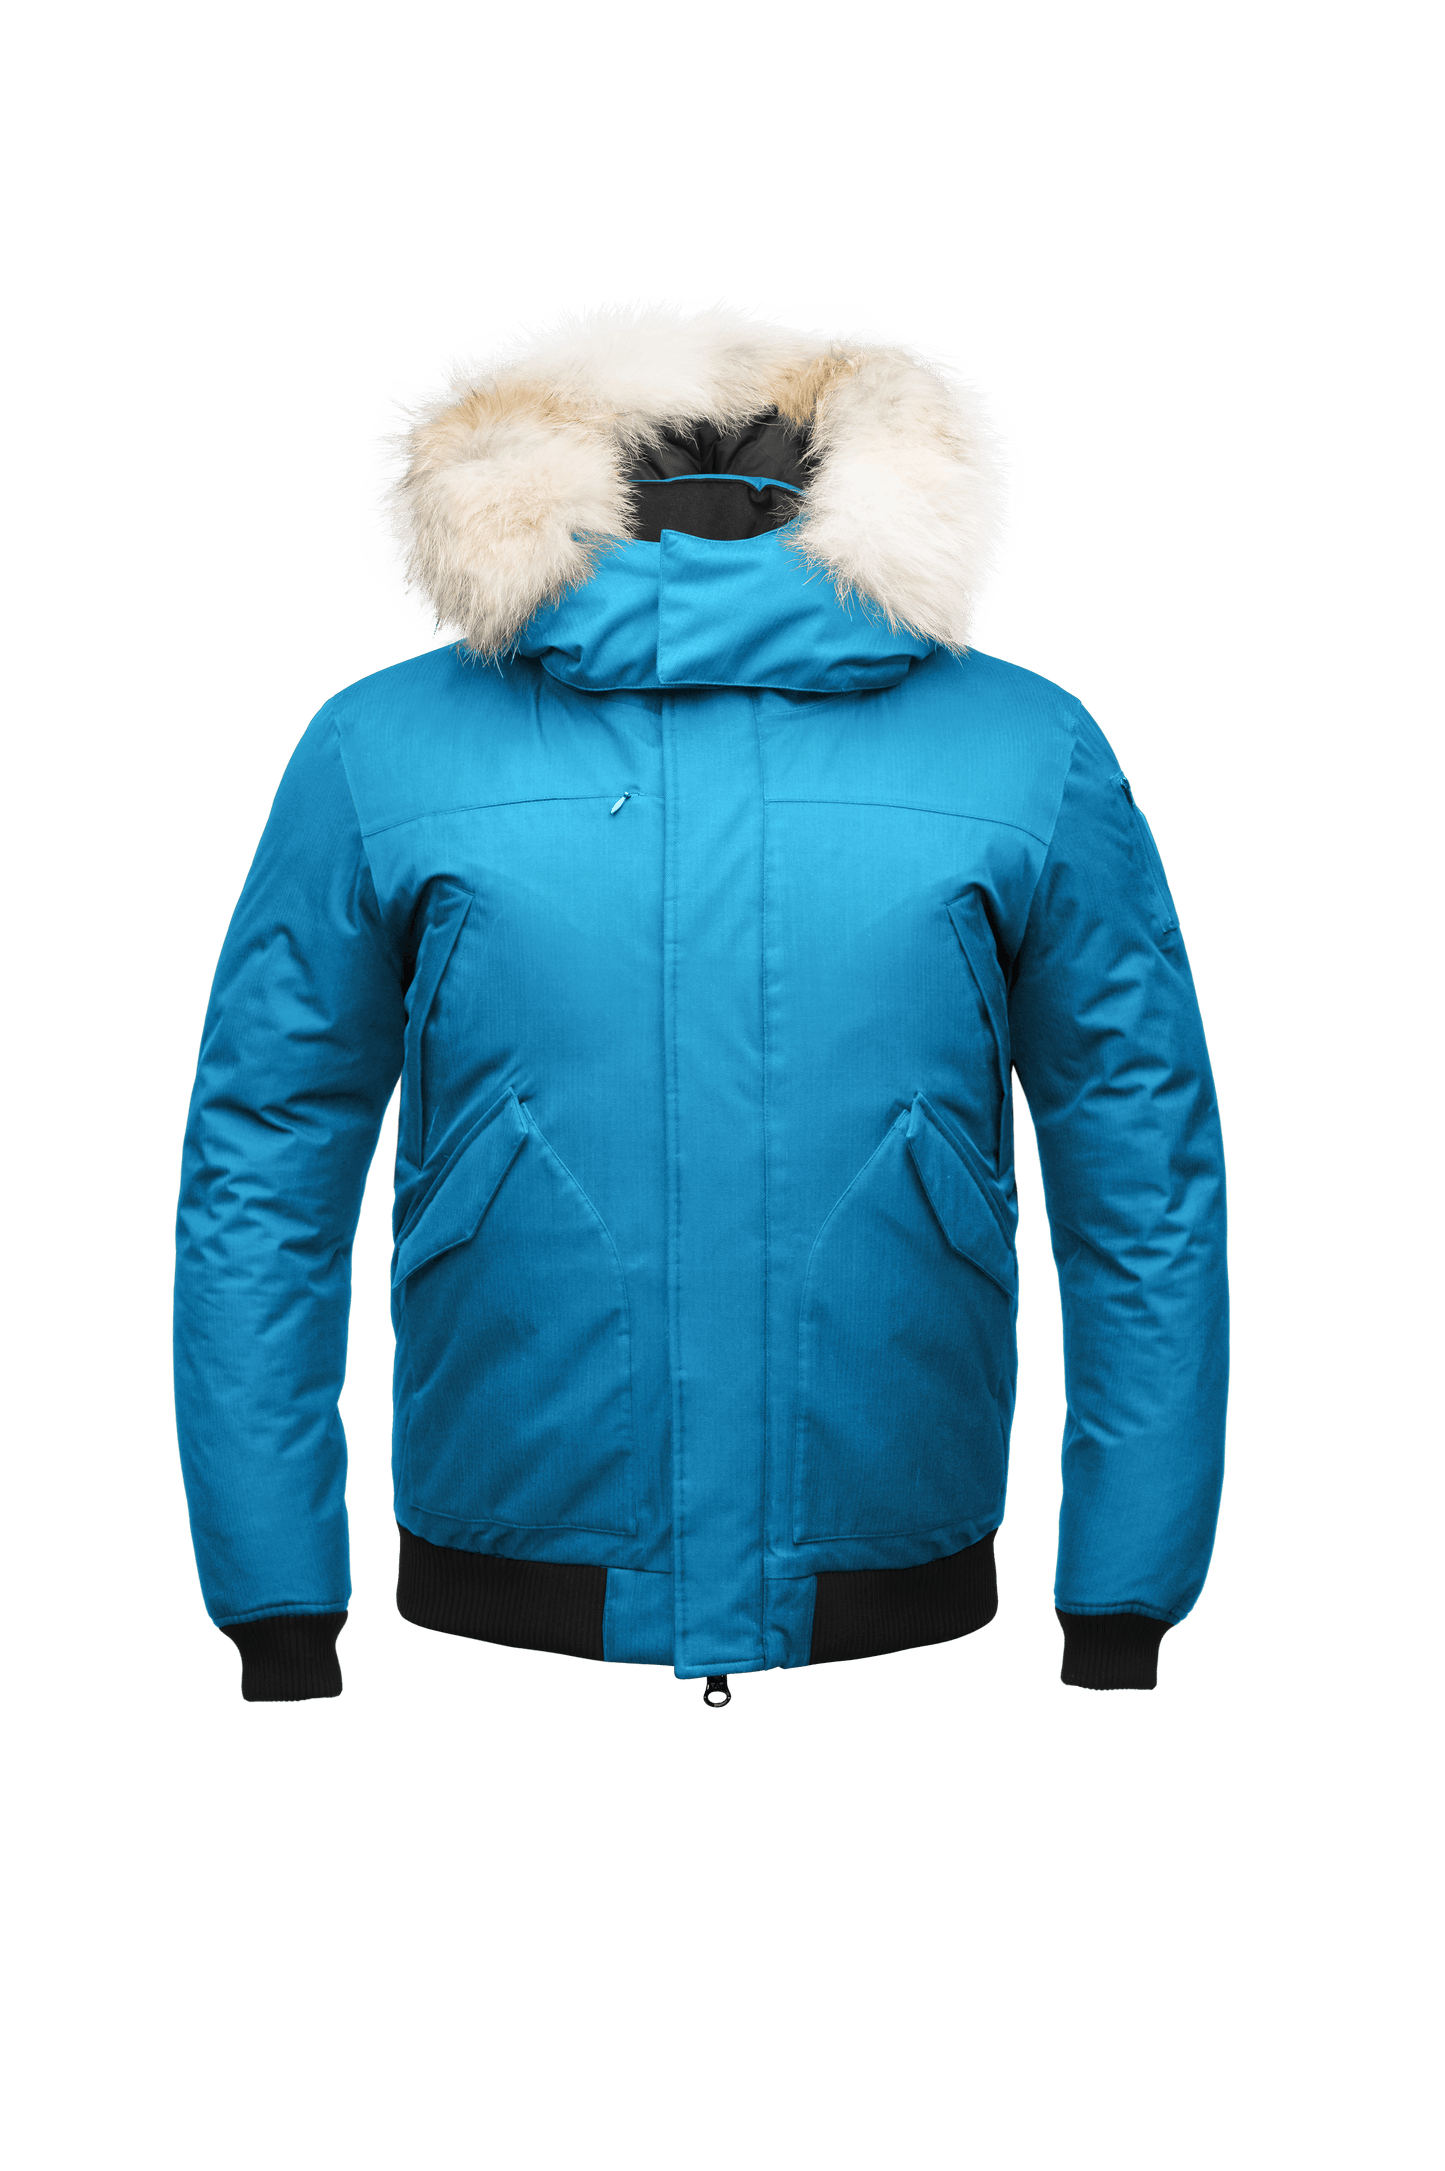 Men's classic down filled bomber jacket with a down filled hood that features a removable coyote fur trim and concealed moldable framing wire in Sea Blue